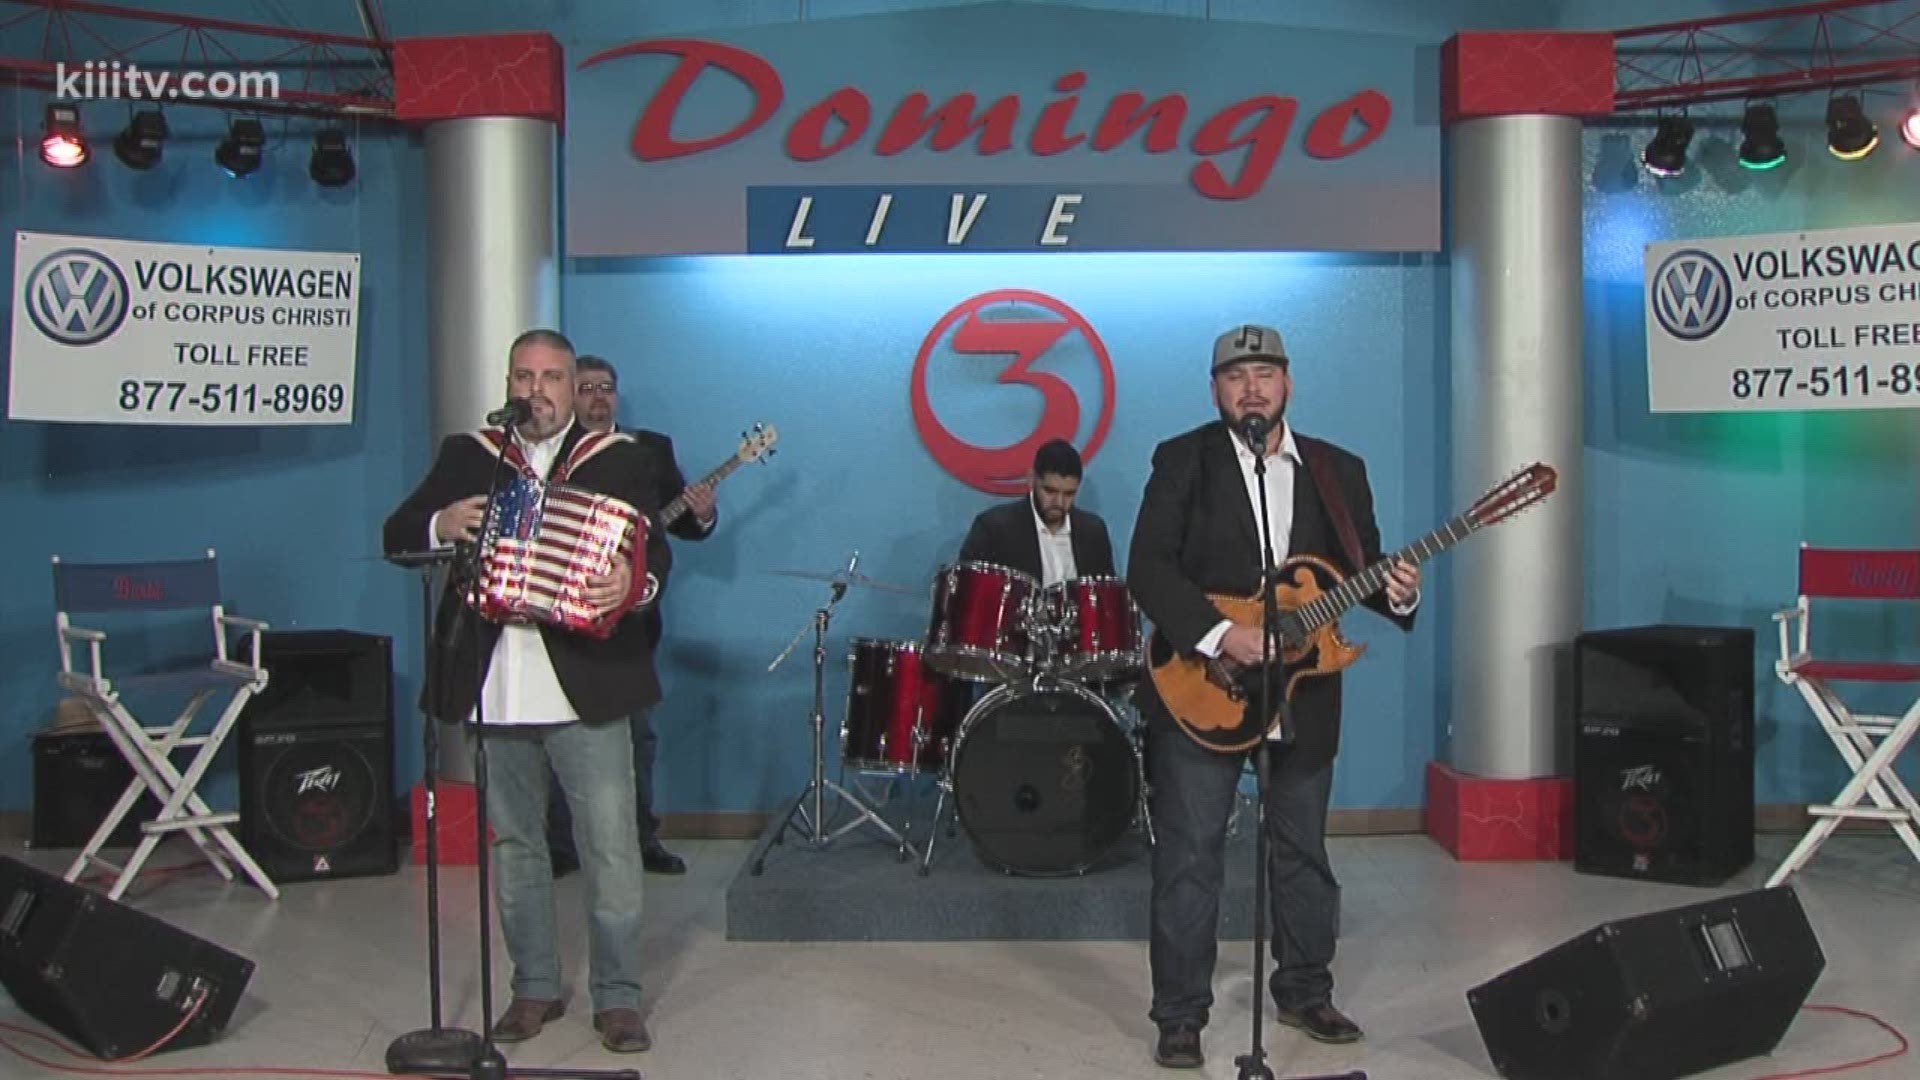 Conjunto Senzibble out of Houston, Texas is an up and coming conjunto band. Here they are opening the Domingo Live show on January 13, 2019, with their performance of "Que Suerte La Mia."